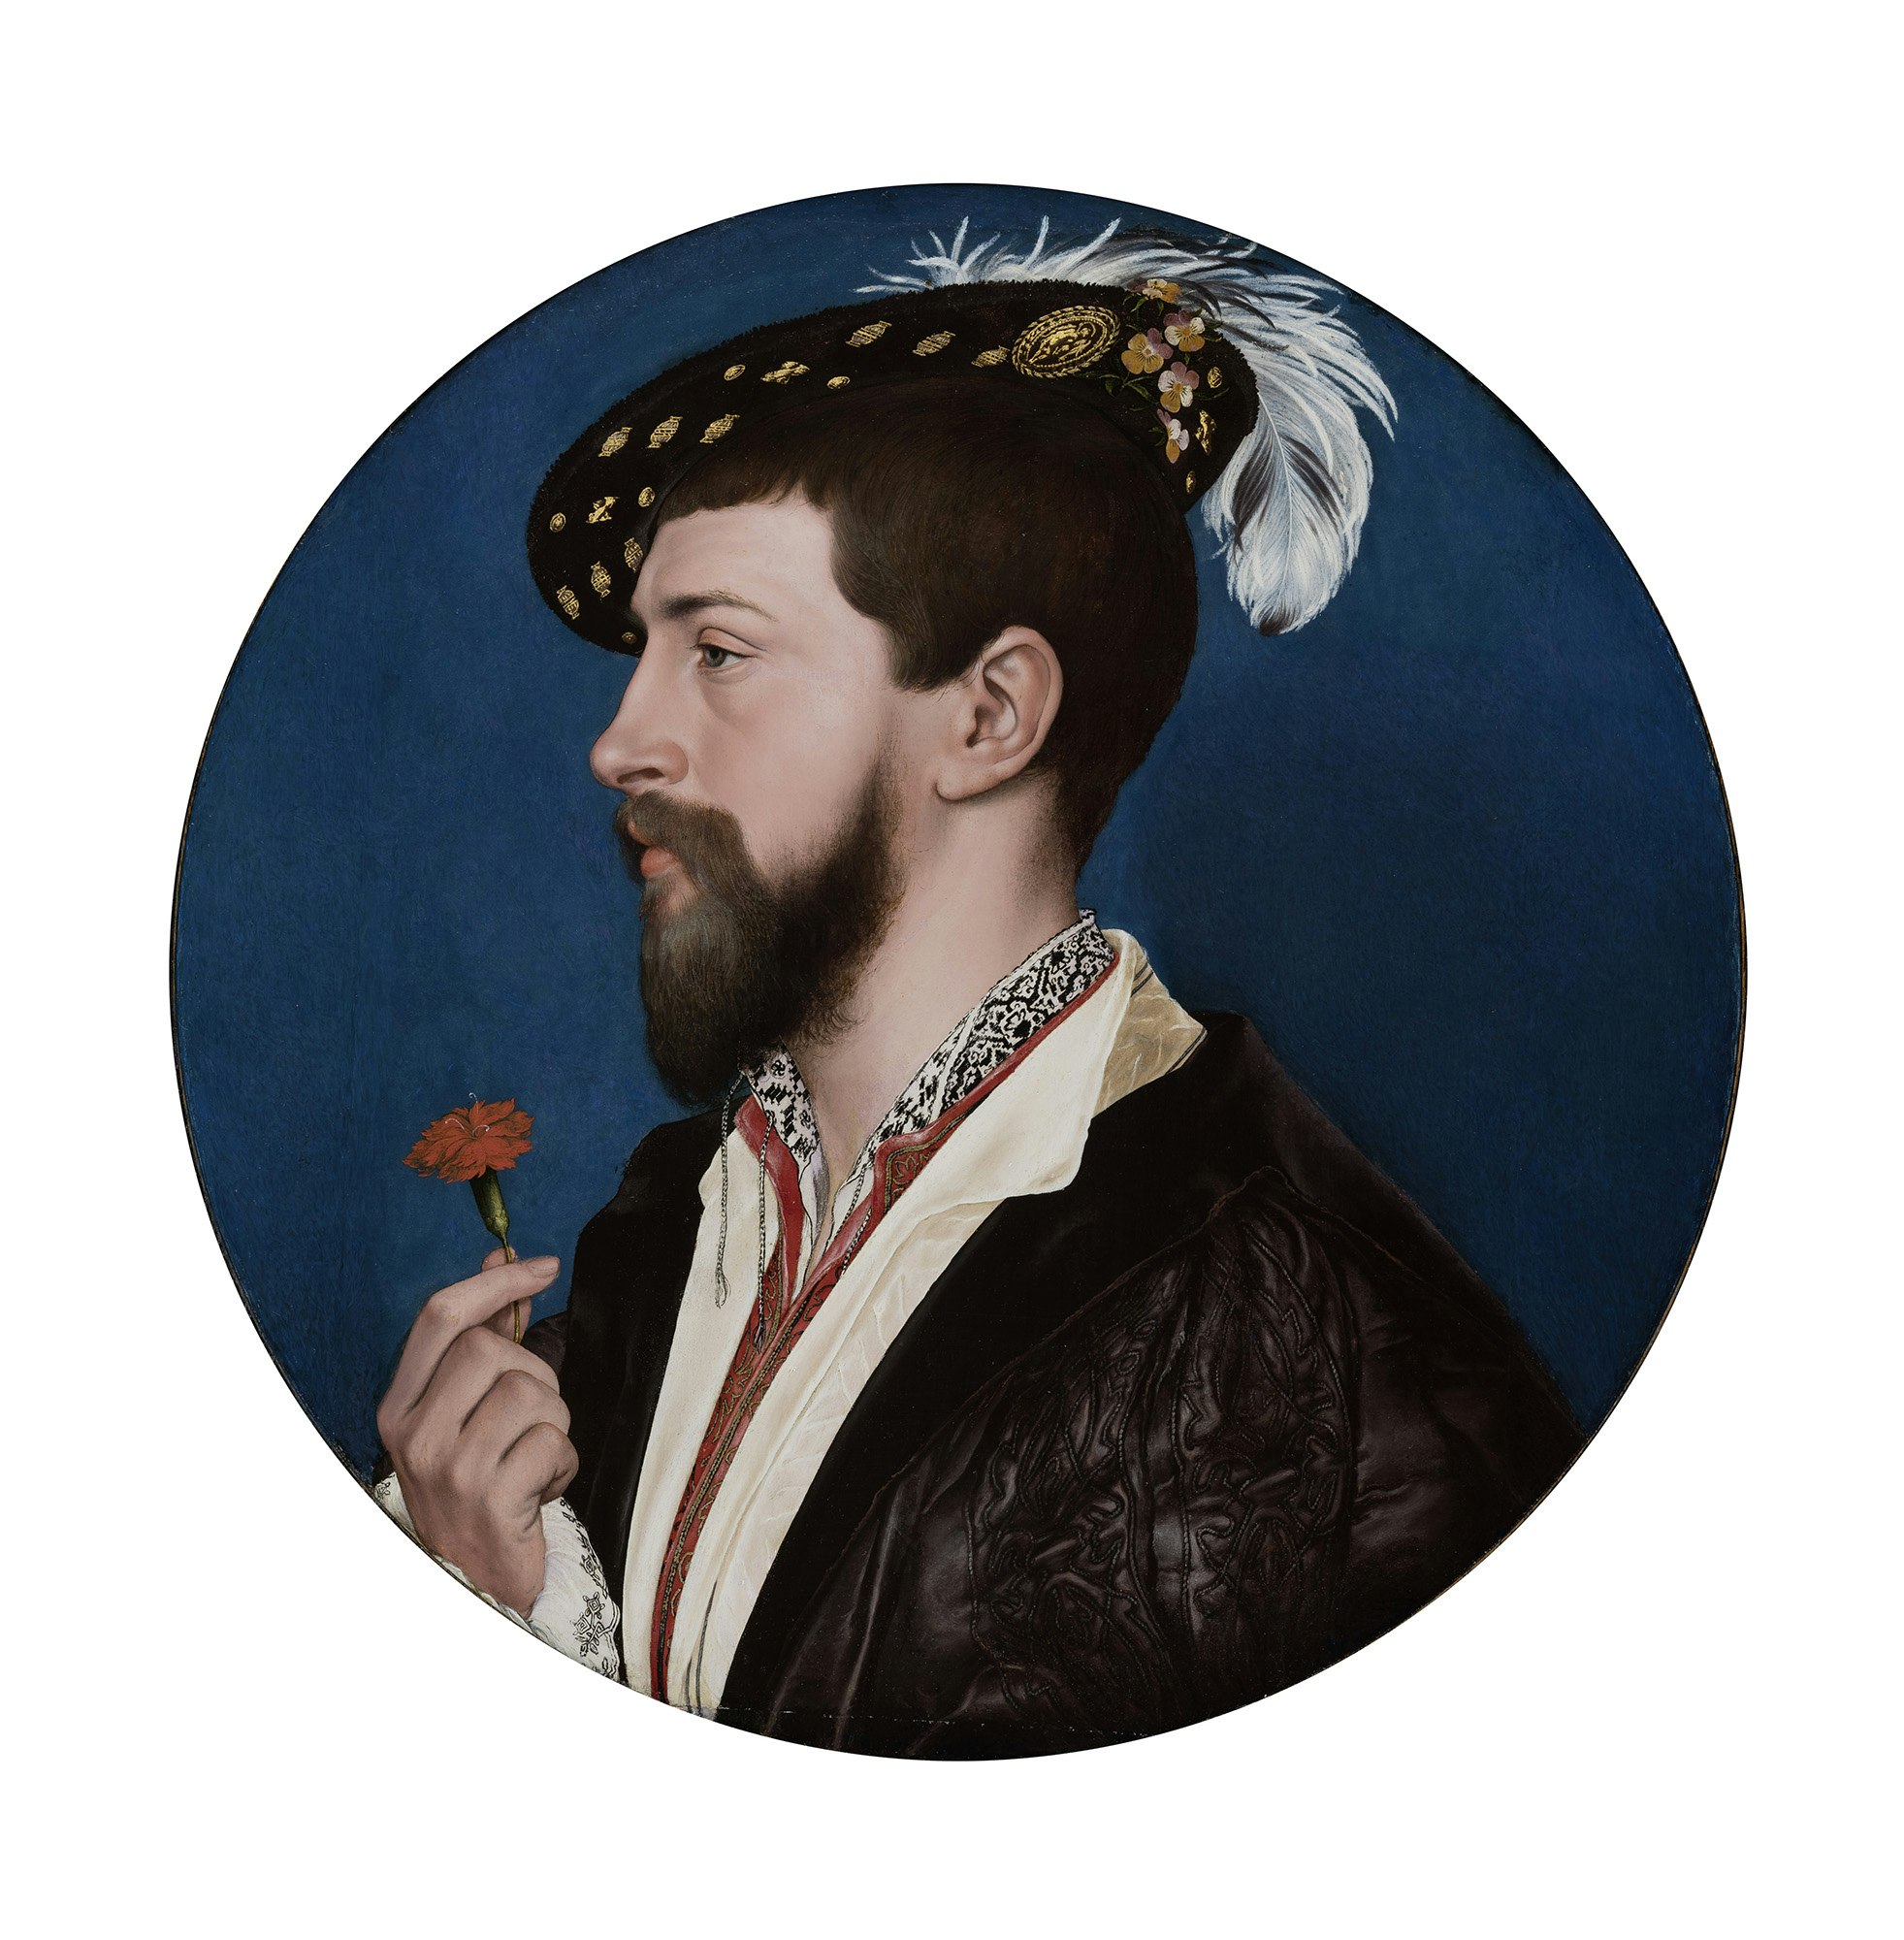 Hans Holbein the Younger, <em>Simon George</em>, ca. 1535–40. Mixed technique on panel, 12 3/16 inch diameter. Städel Museum, Frankfurt am Main. Photo: Städel Museum.